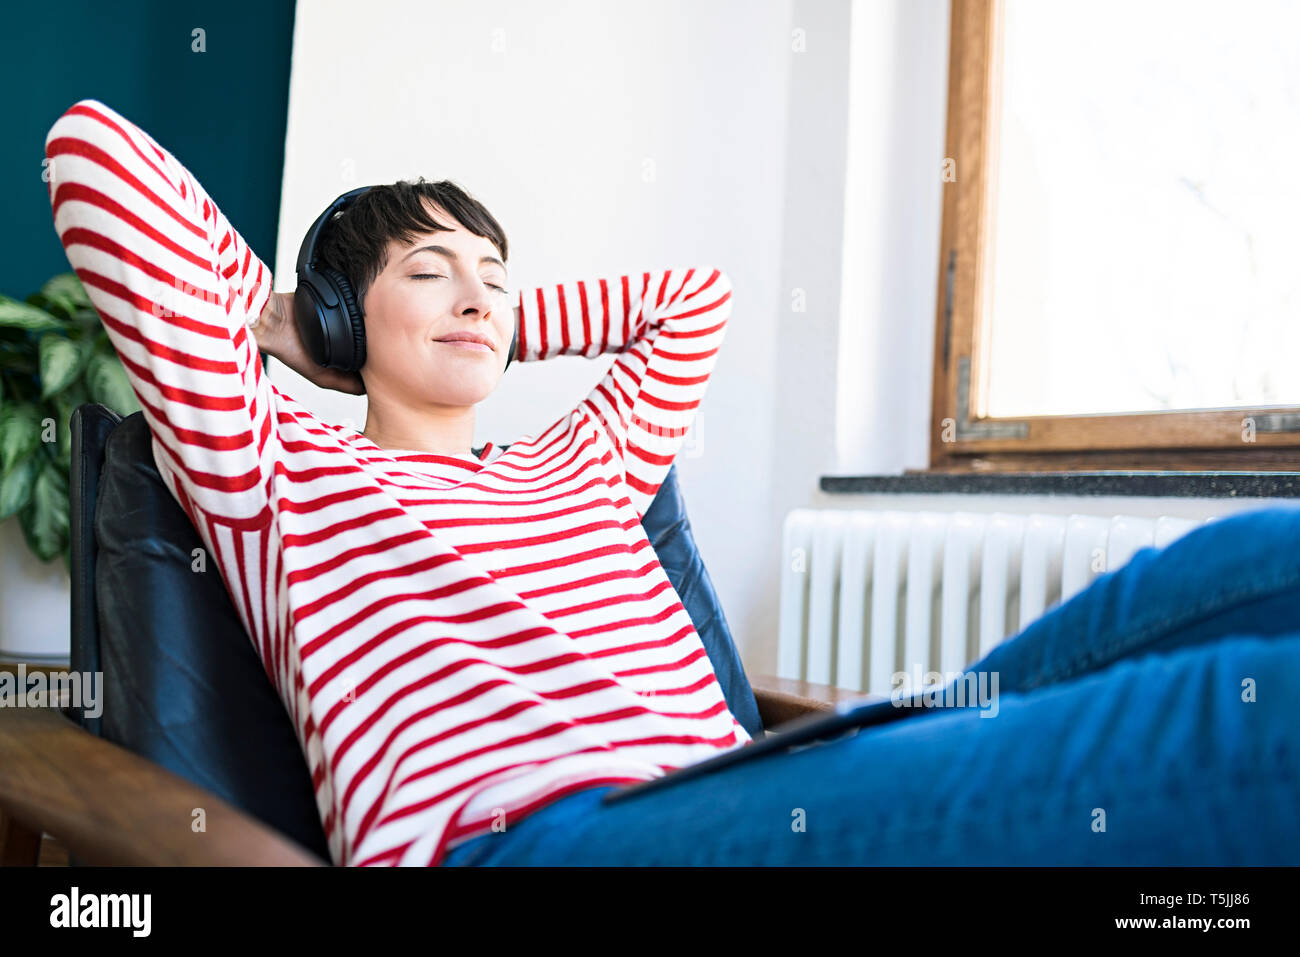 Short-haired woman with headphones relaxing in lounge chair Stock Photo